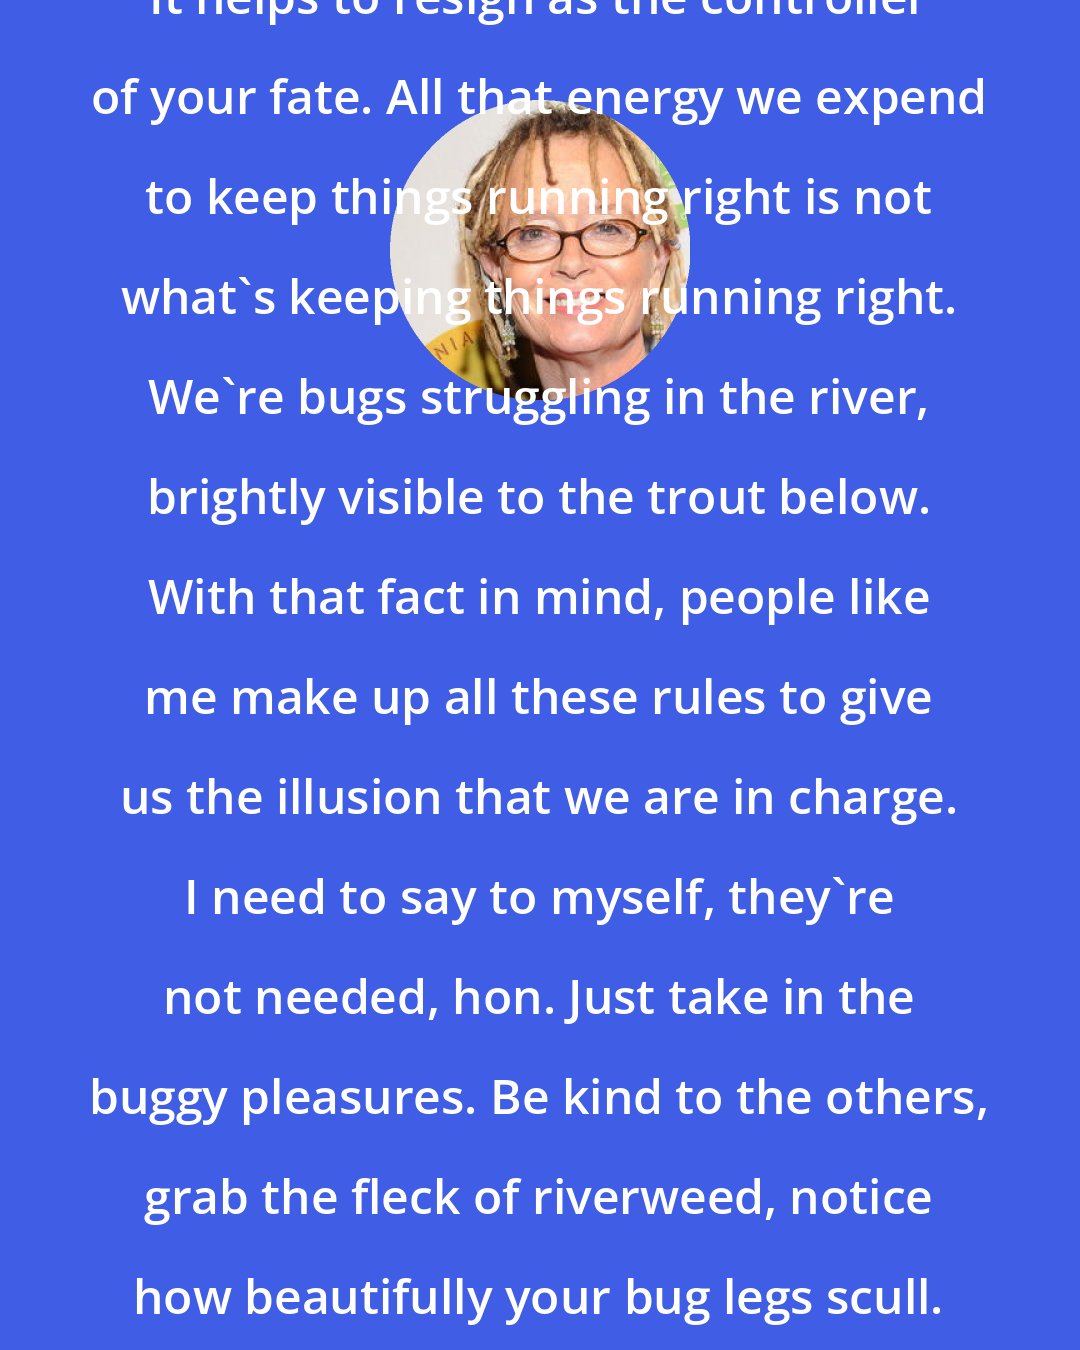 Anne Lamott: It helps to resign as the controller of your fate. All that energy we expend to keep things running right is not what's keeping things running right. We're bugs struggling in the river, brightly visible to the trout below. With that fact in mind, people like me make up all these rules to give us the illusion that we are in charge. I need to say to myself, they're not needed, hon. Just take in the buggy pleasures. Be kind to the others, grab the fleck of riverweed, notice how beautifully your bug legs scull.